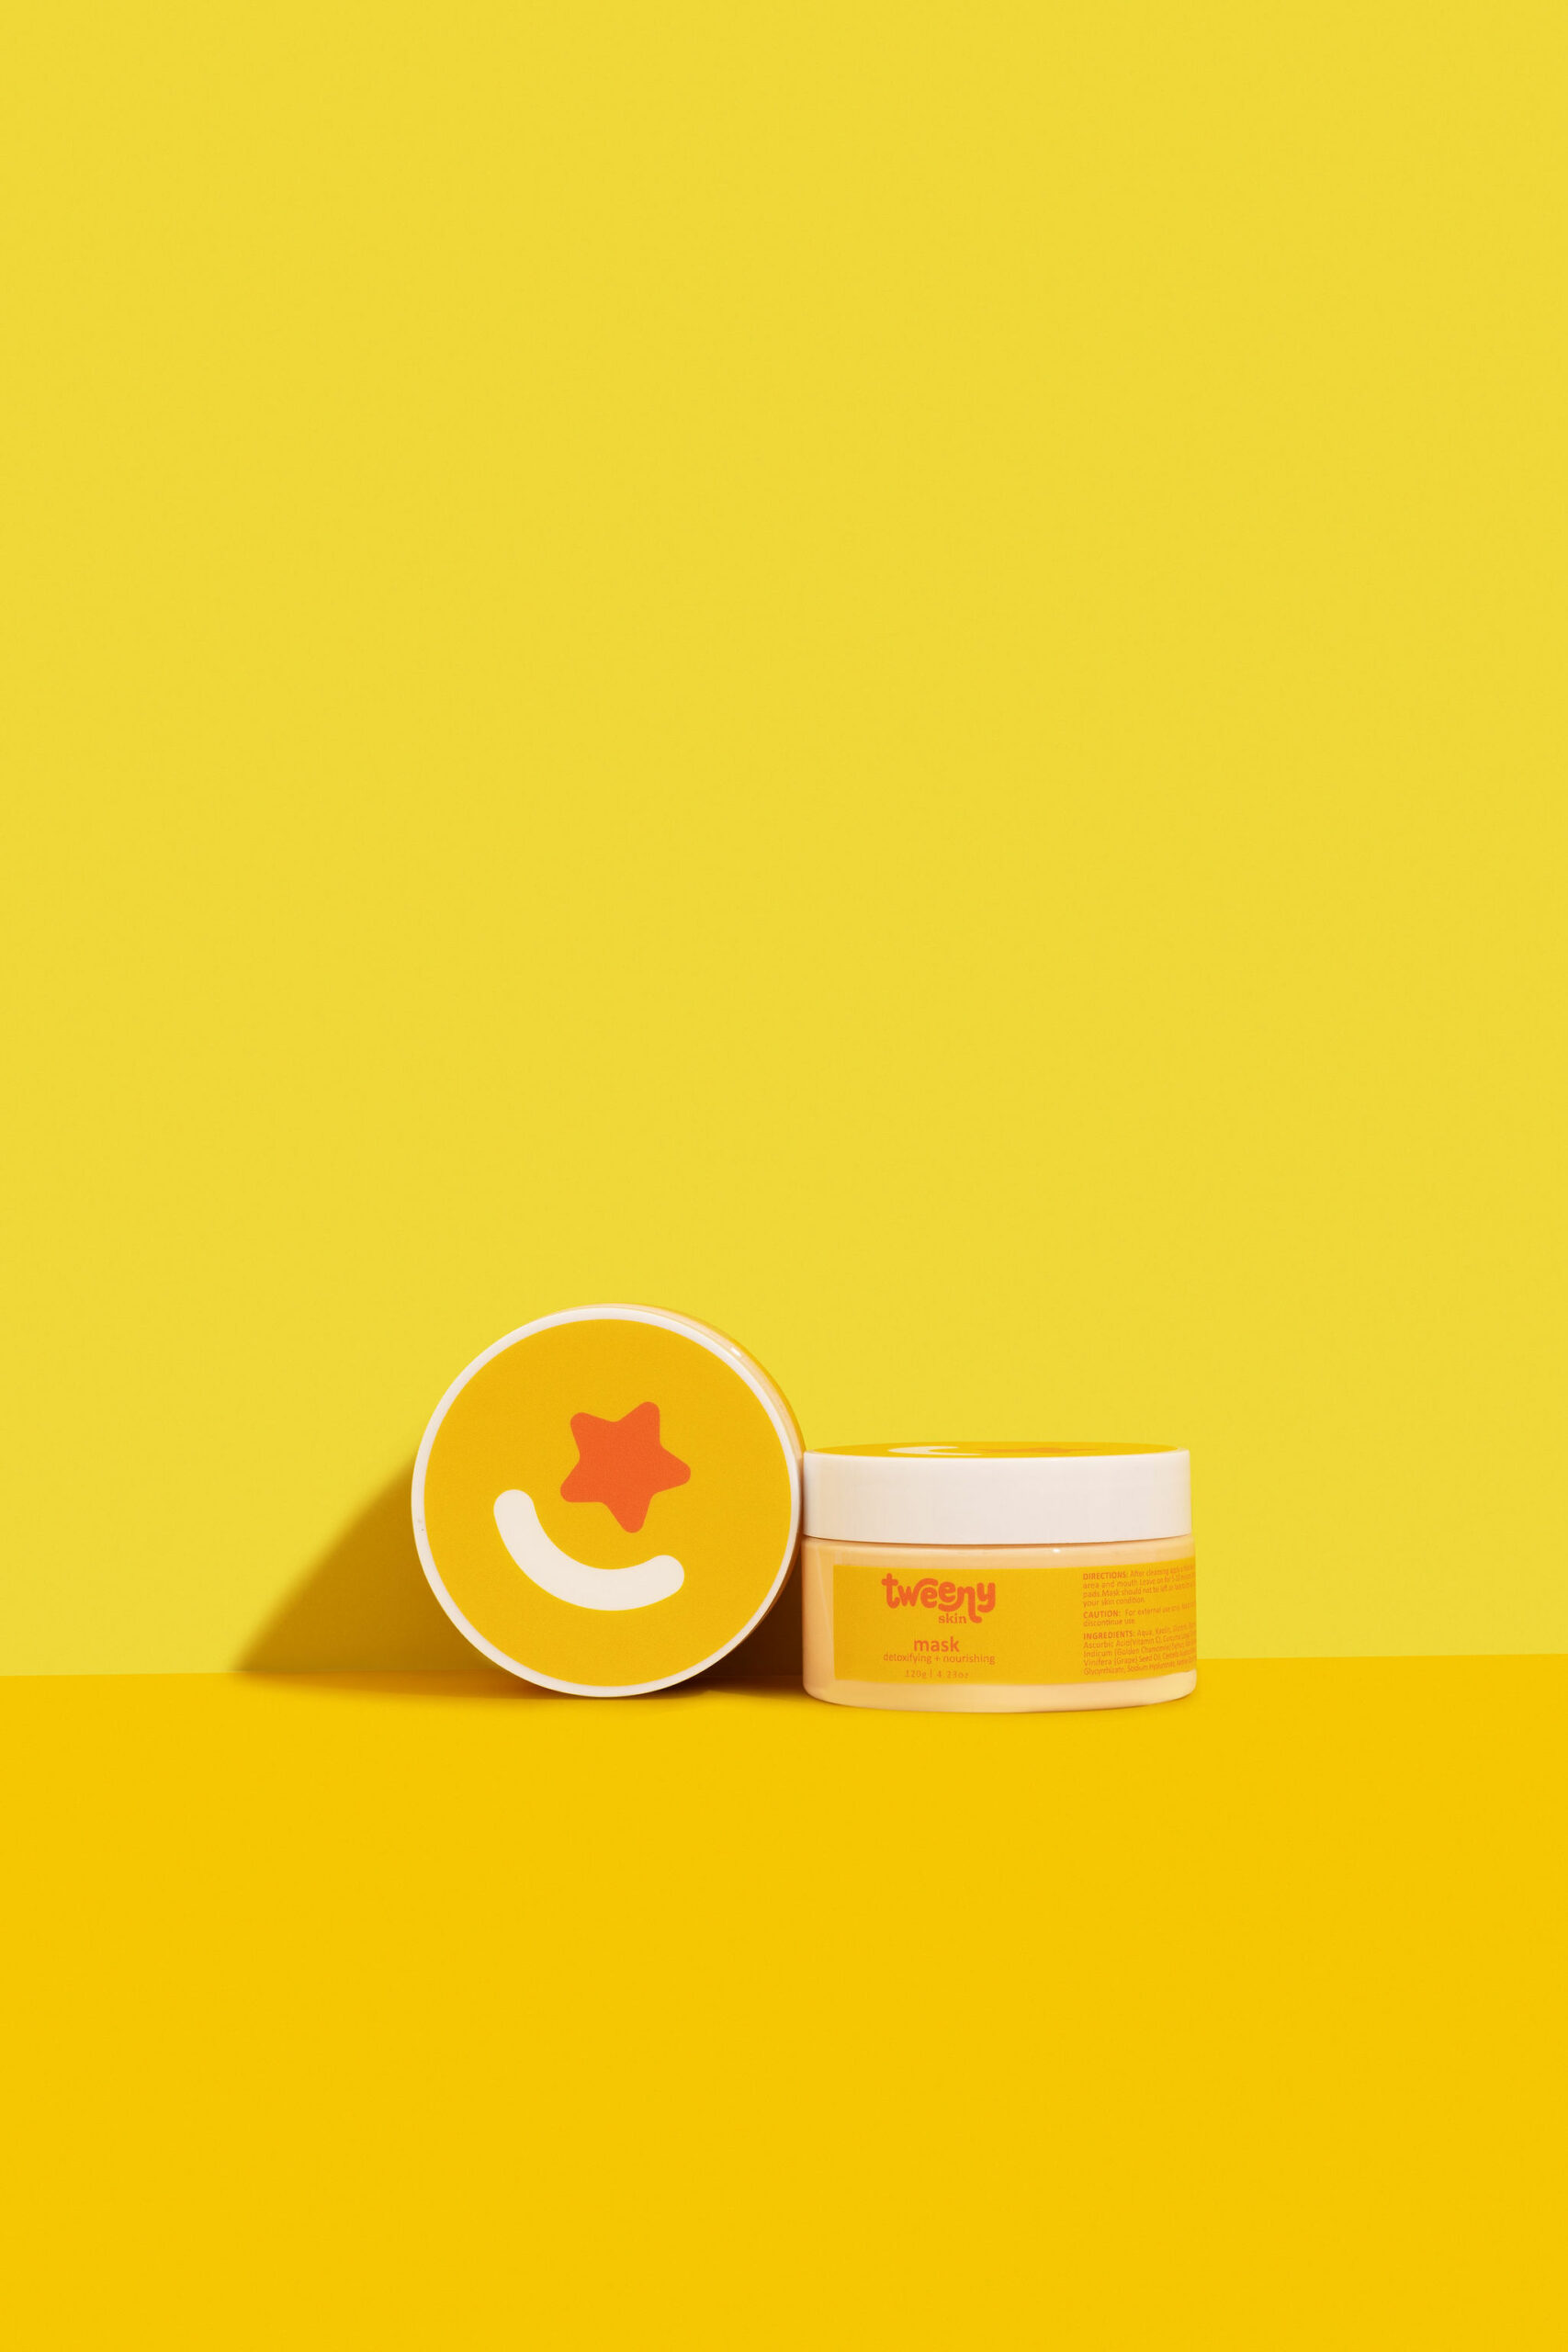 bright and bold product photography for a tween skincare brand. Creative product photography by Colourpop Studio